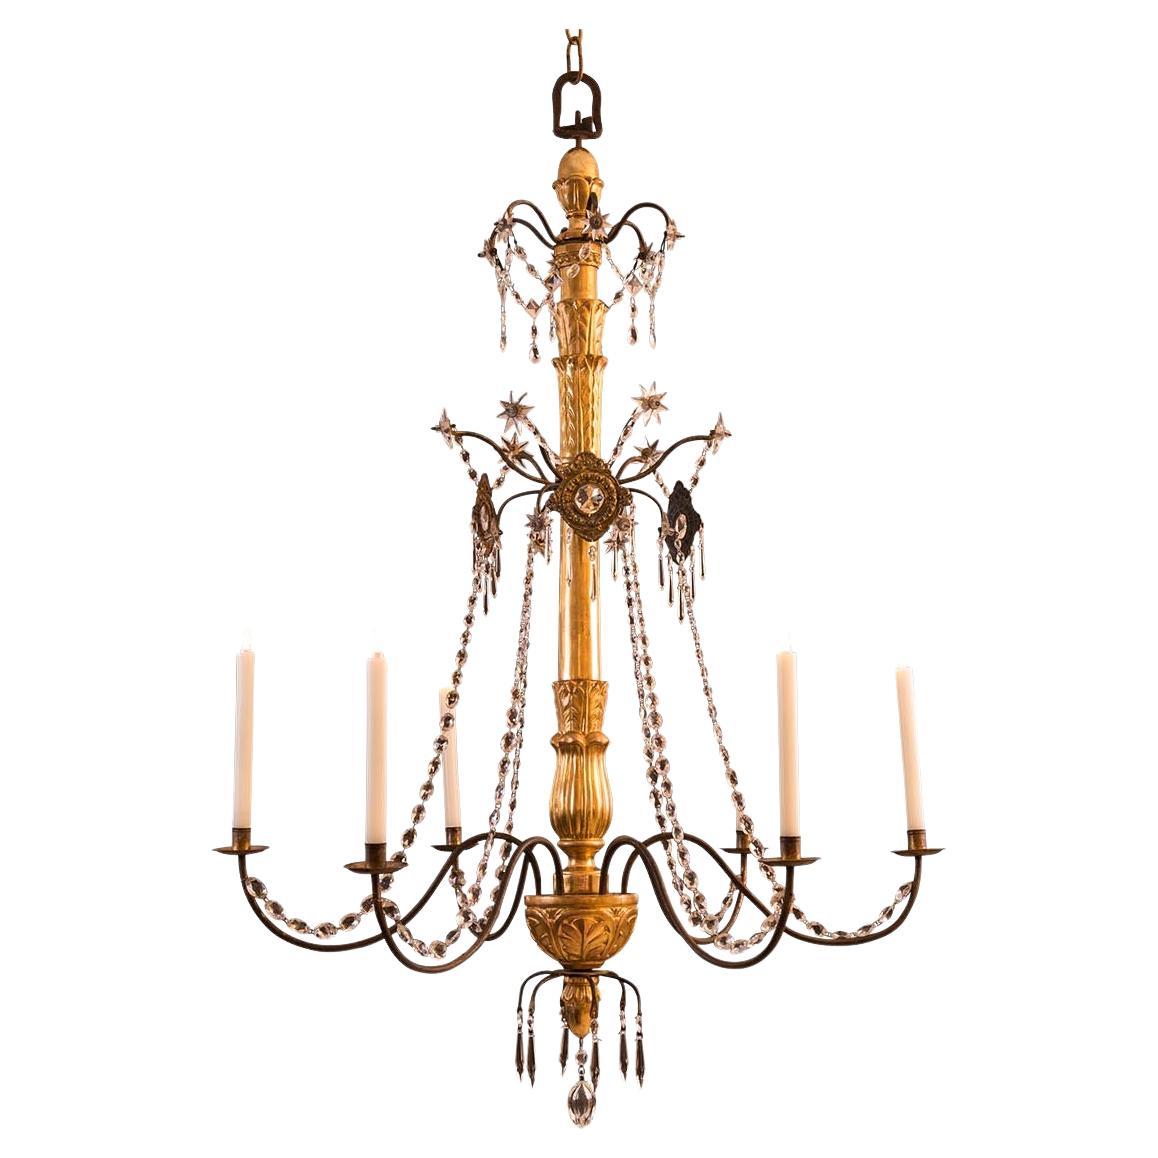 Original Biedermeier Chandelier 19th Century '1850' Carved and Gilded Six Flames For Sale